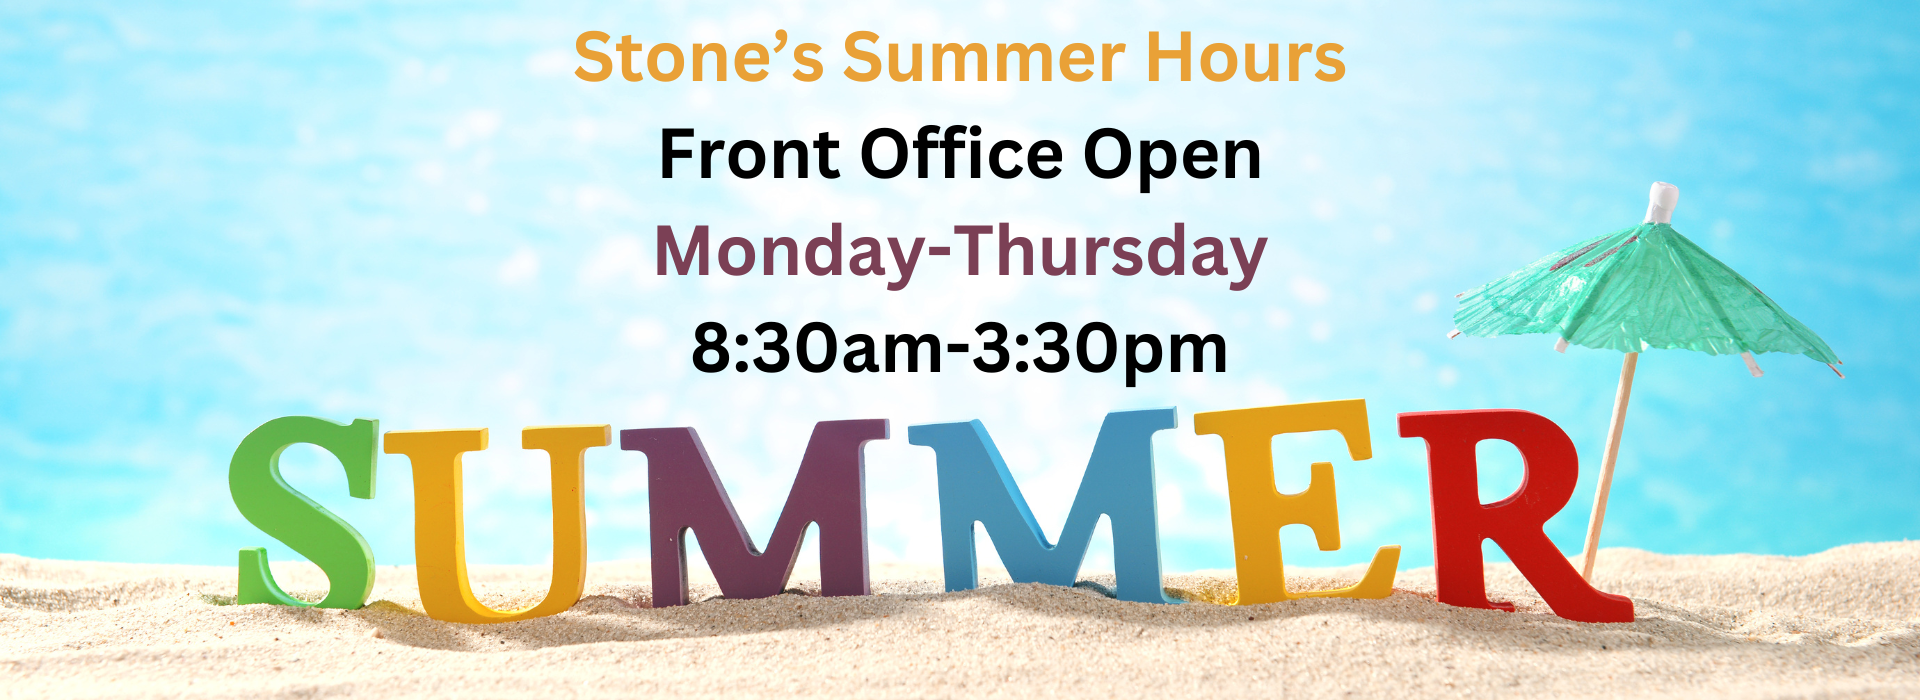 Stone’s Summer Hours Front Office Open Monday-Thursday 8:30am-3:30pm